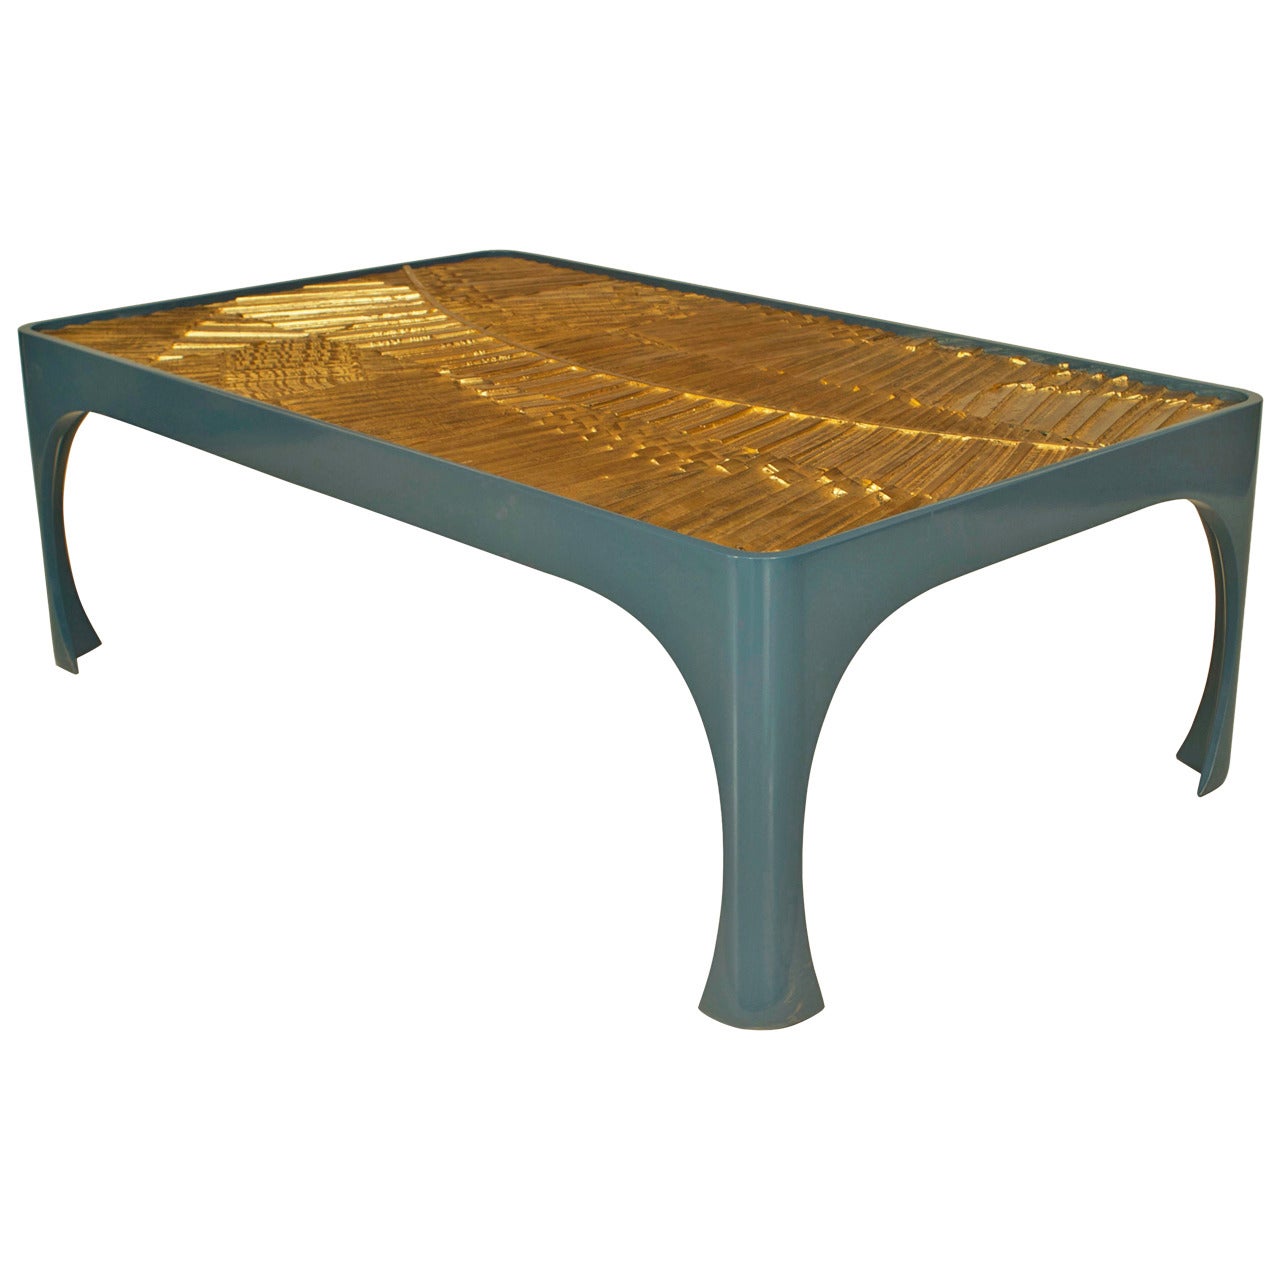 1970s American Inset Gilt Resin and Lacquered Wood Coffee Table